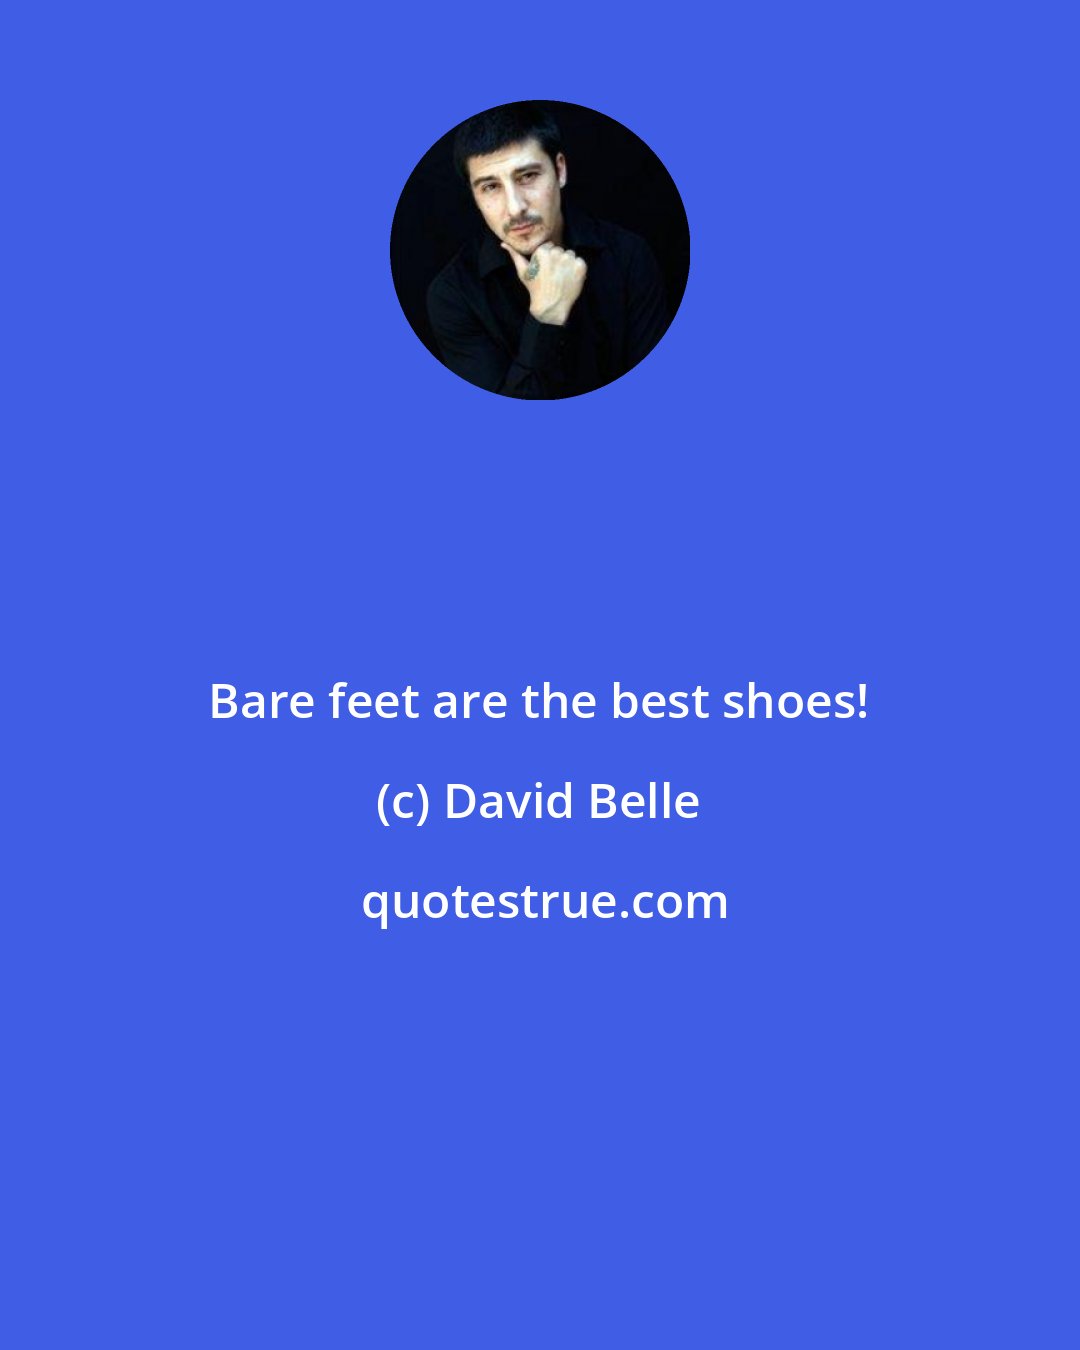 David Belle: Bare feet are the best shoes!